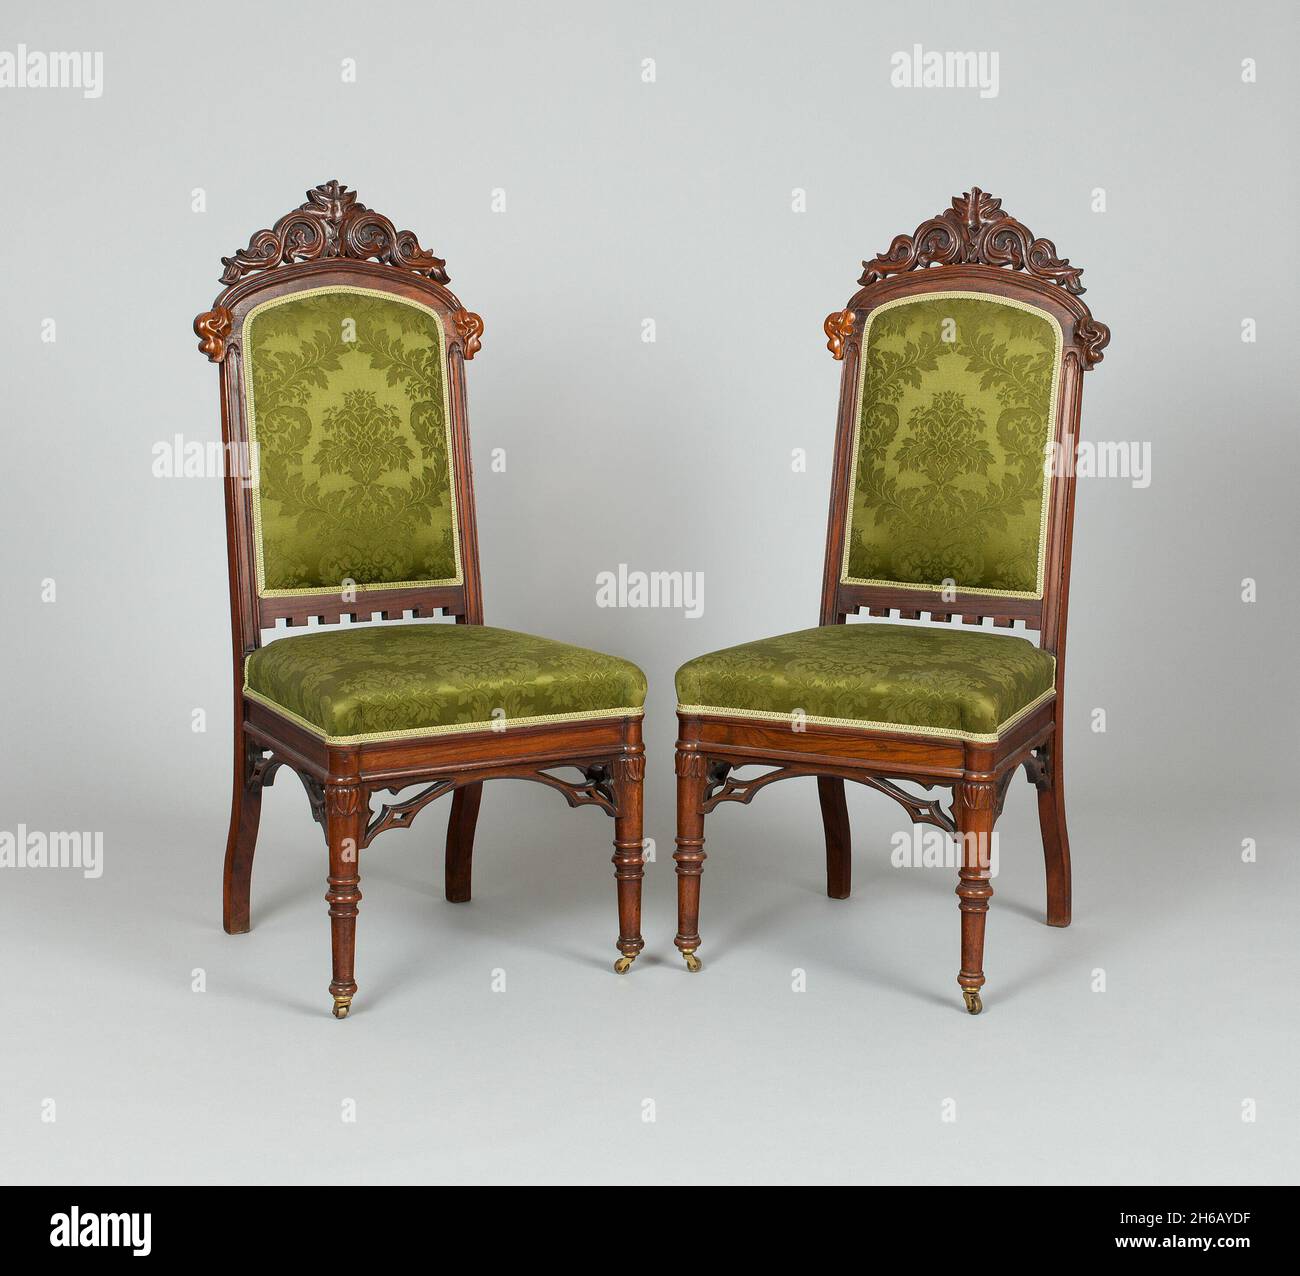 Pair of Side Chairs, c. 1849. Designed by Alexander Jackson Davis, made by William Burns and Peter Trainque. Stock Photo